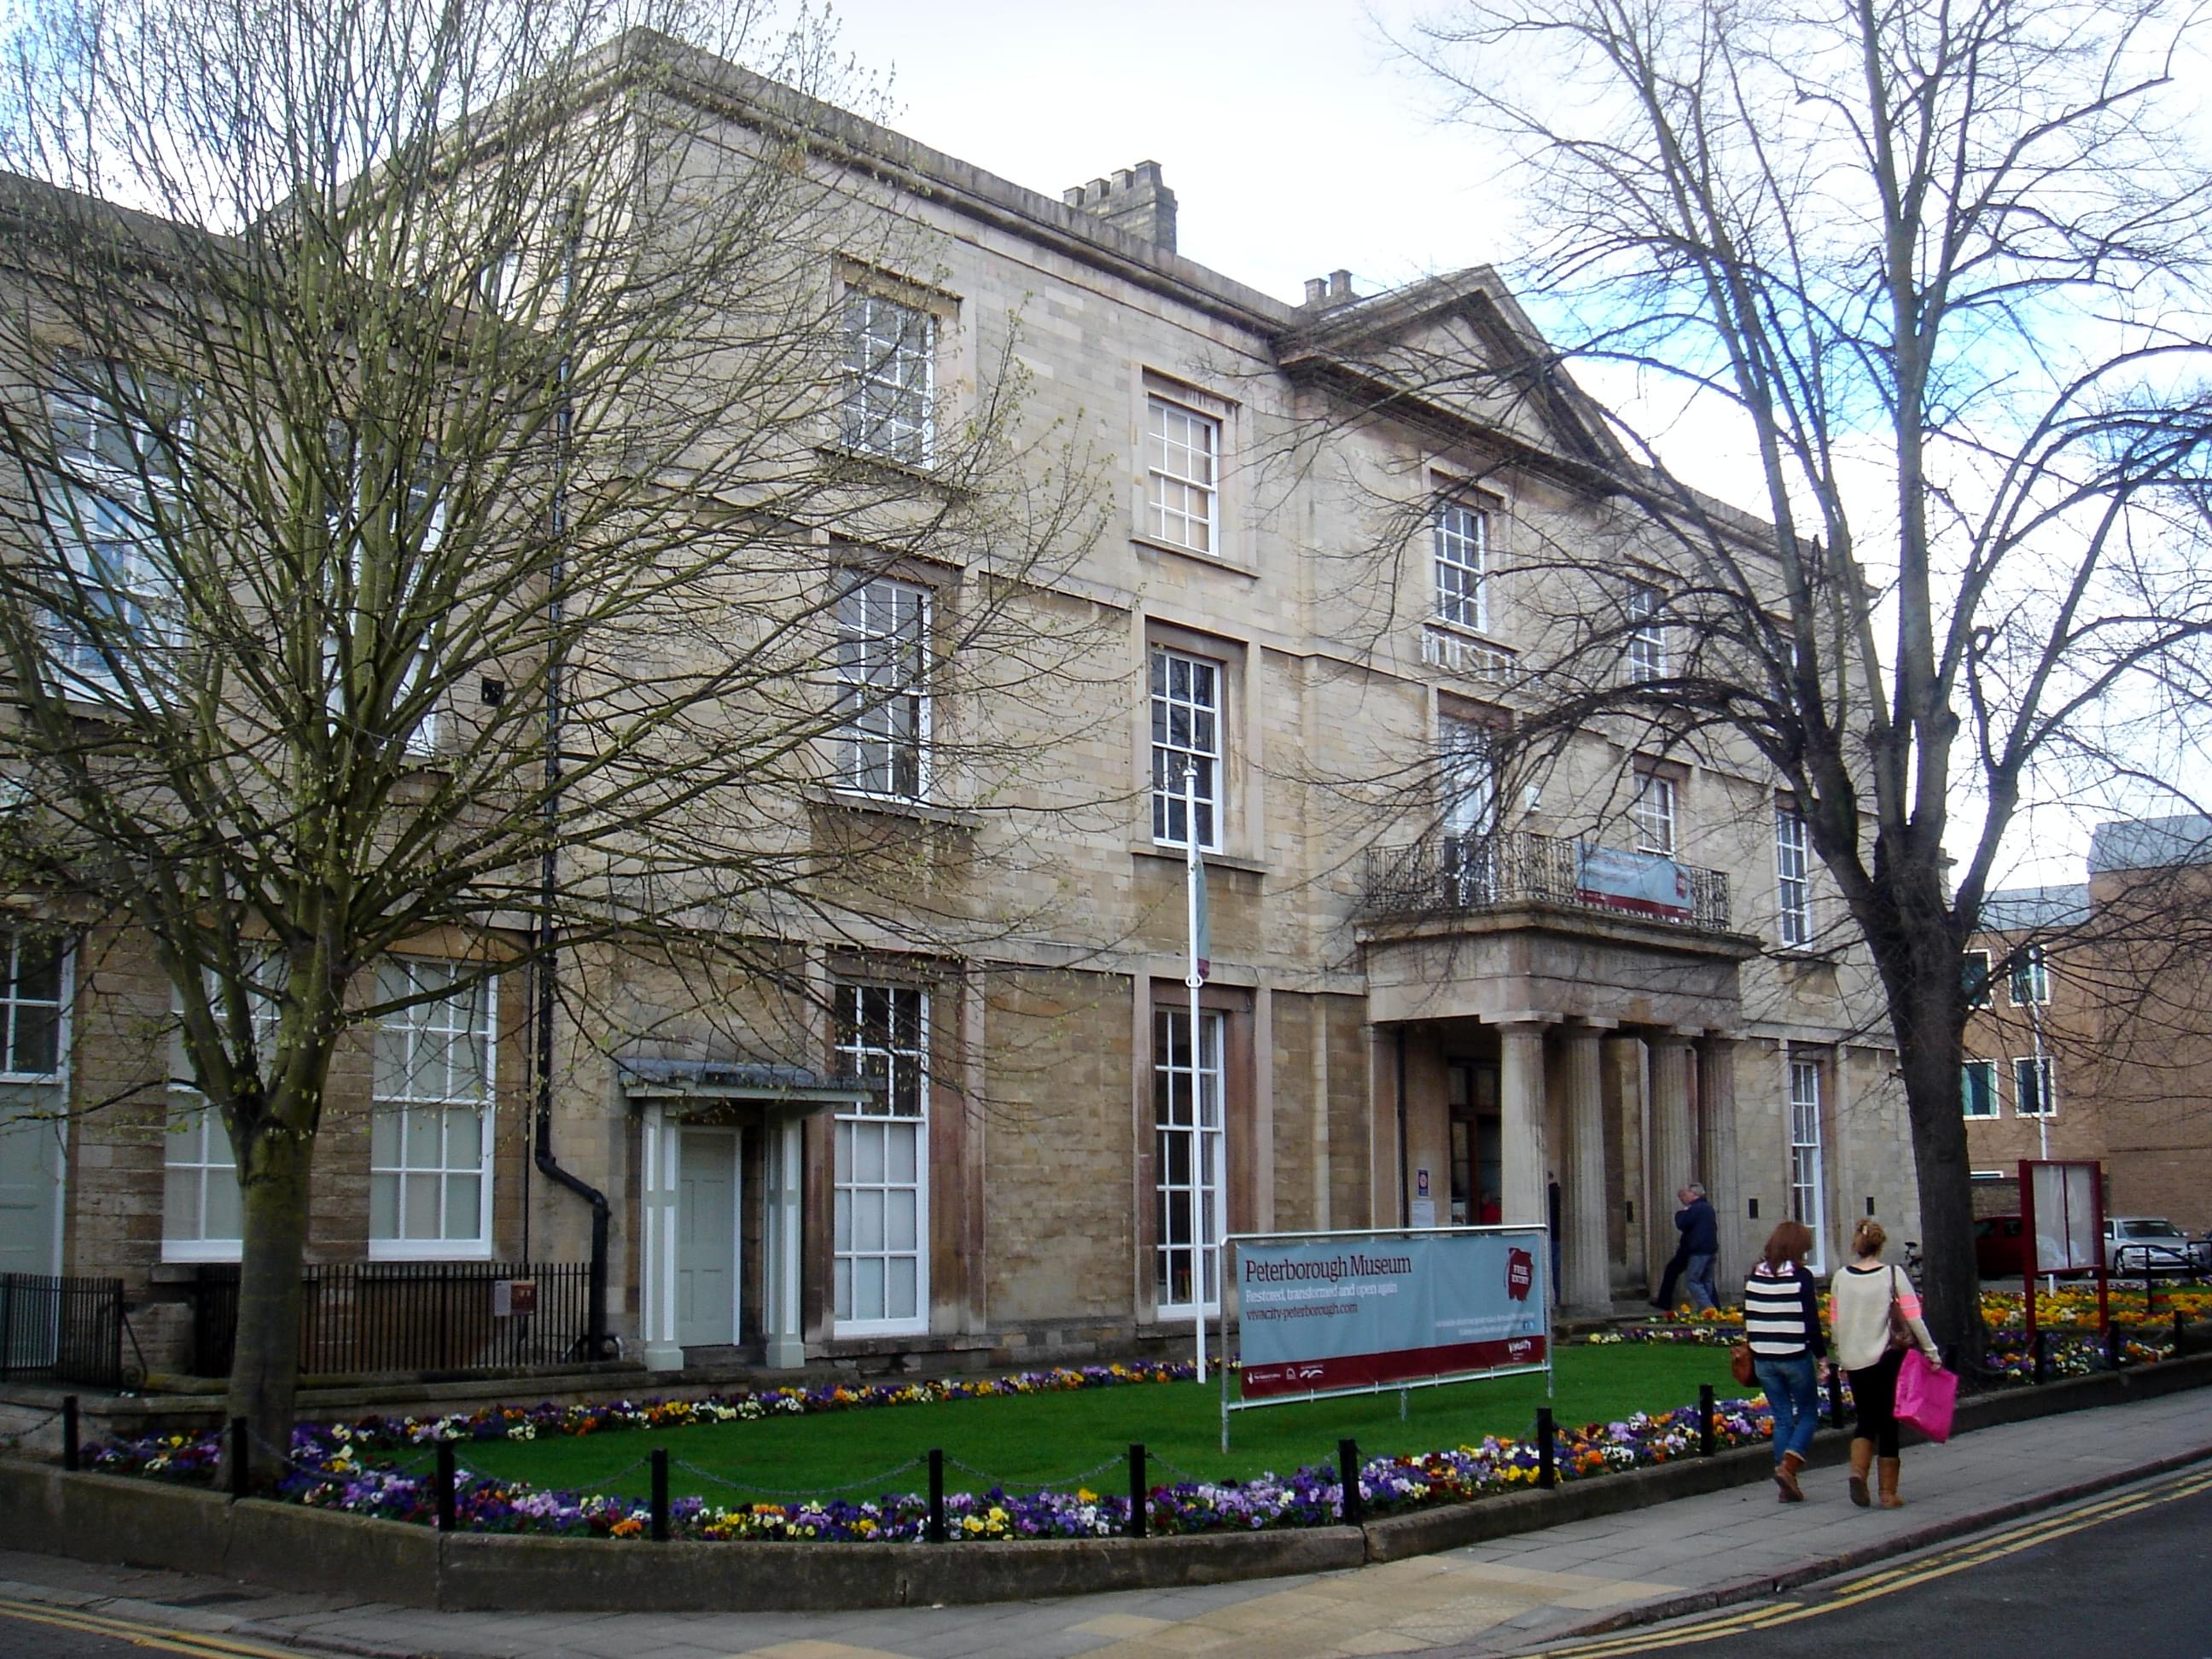 Peterborough Museum Overview